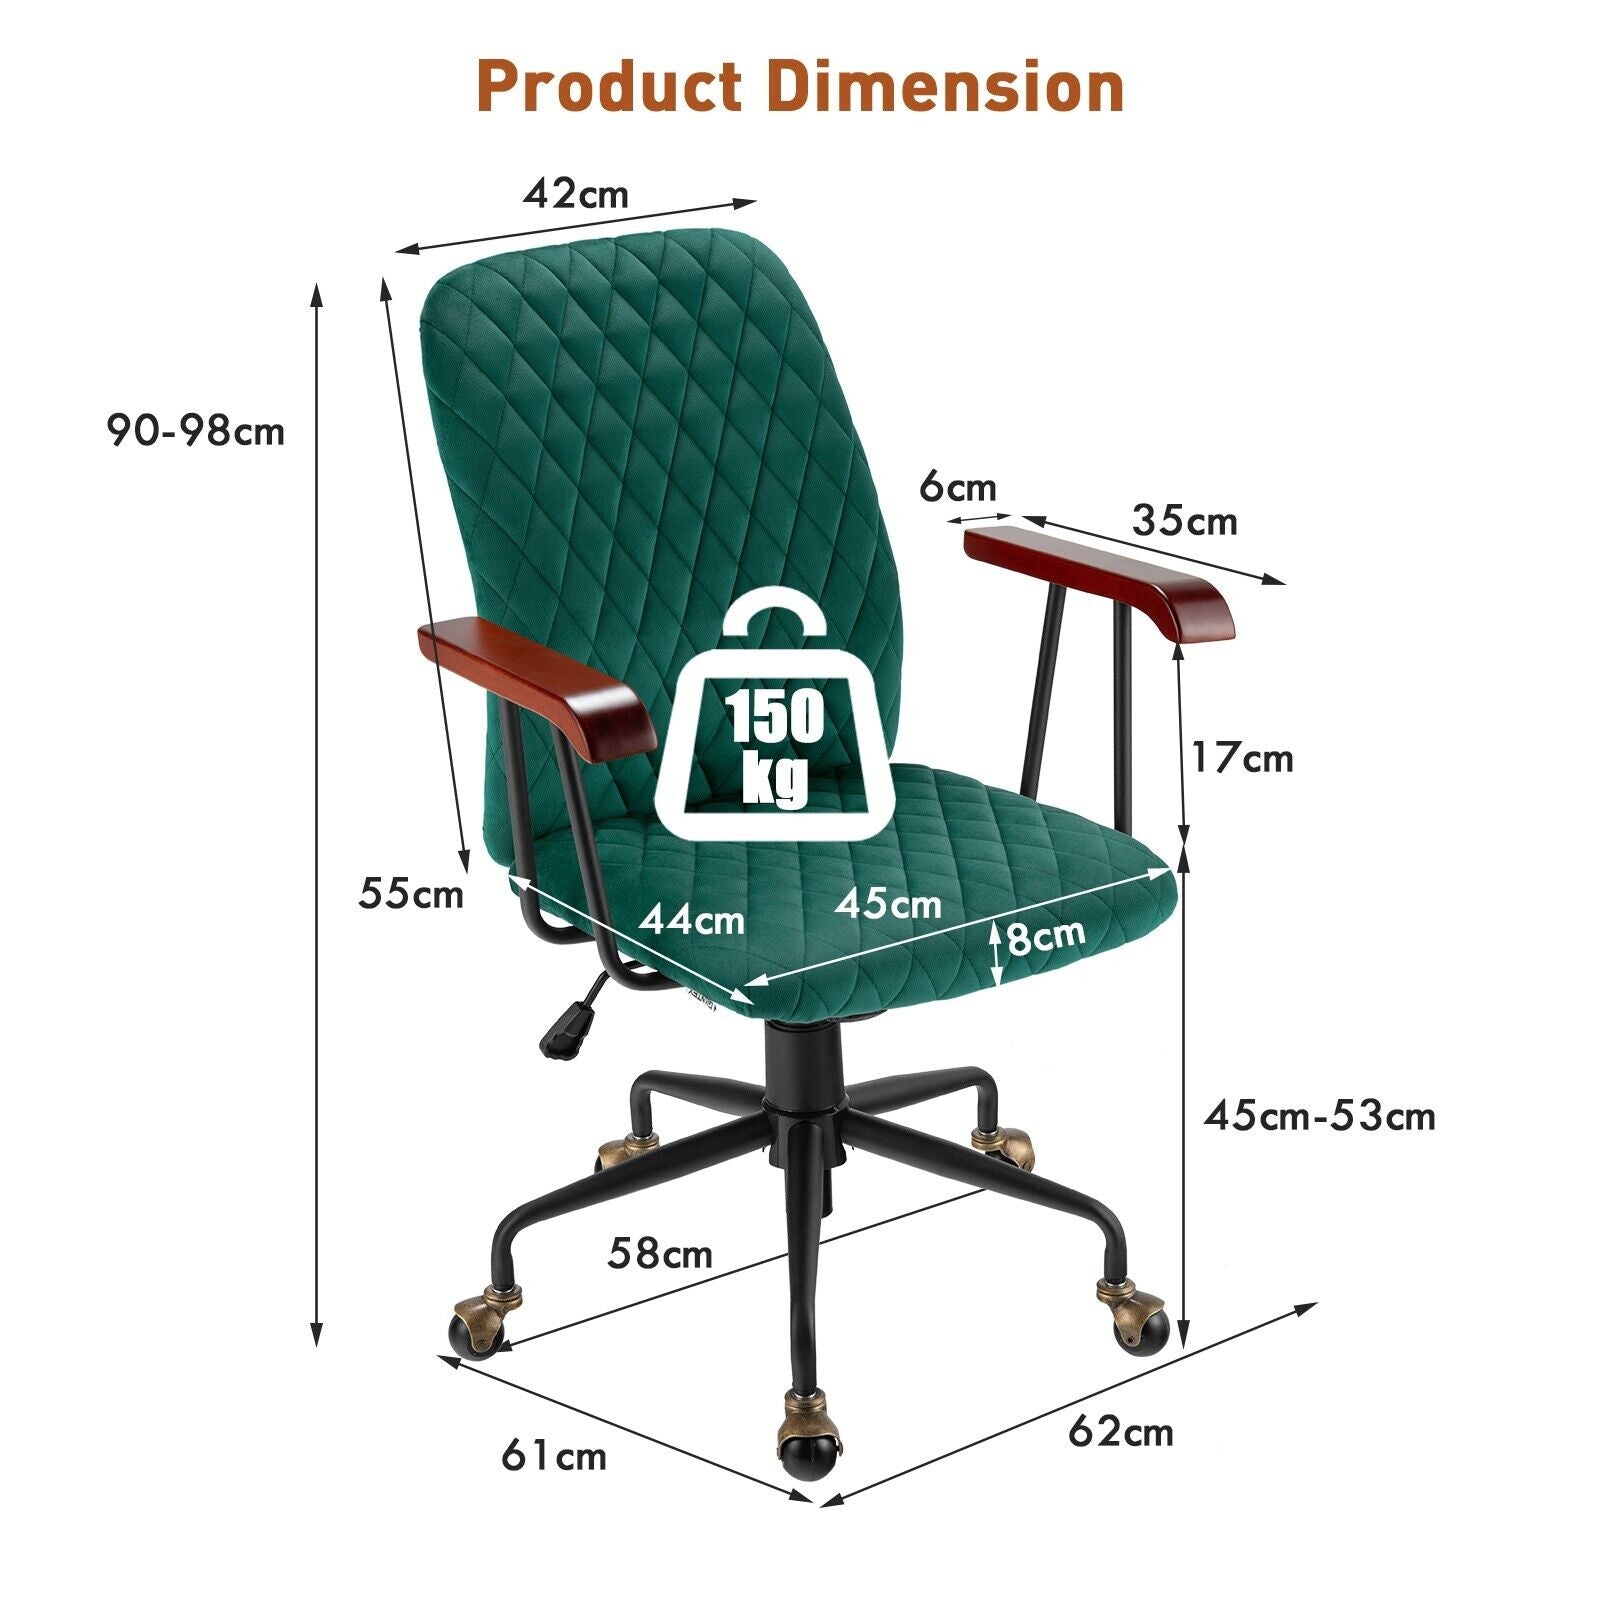 Adjustable Velvet Rocking Leisure Chair with Padded Seat and Rubber Wood Armrests-Green